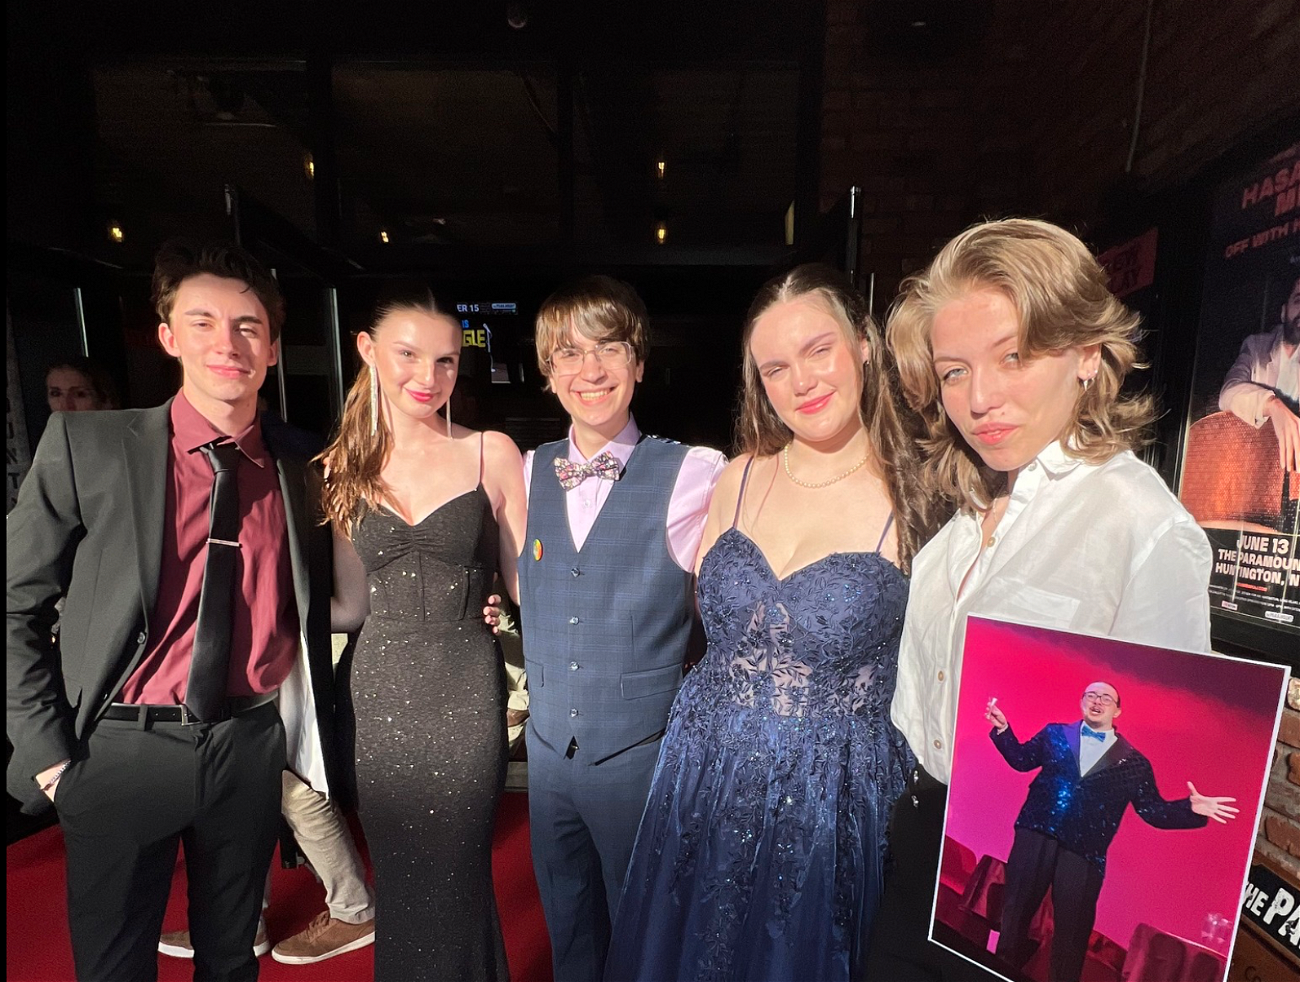 Northport High School students enjoy a night out on the town, complete with red carpet, at the Hunting-Tony Awards. Photo courtesy of the Northport-East Northport UFSD.